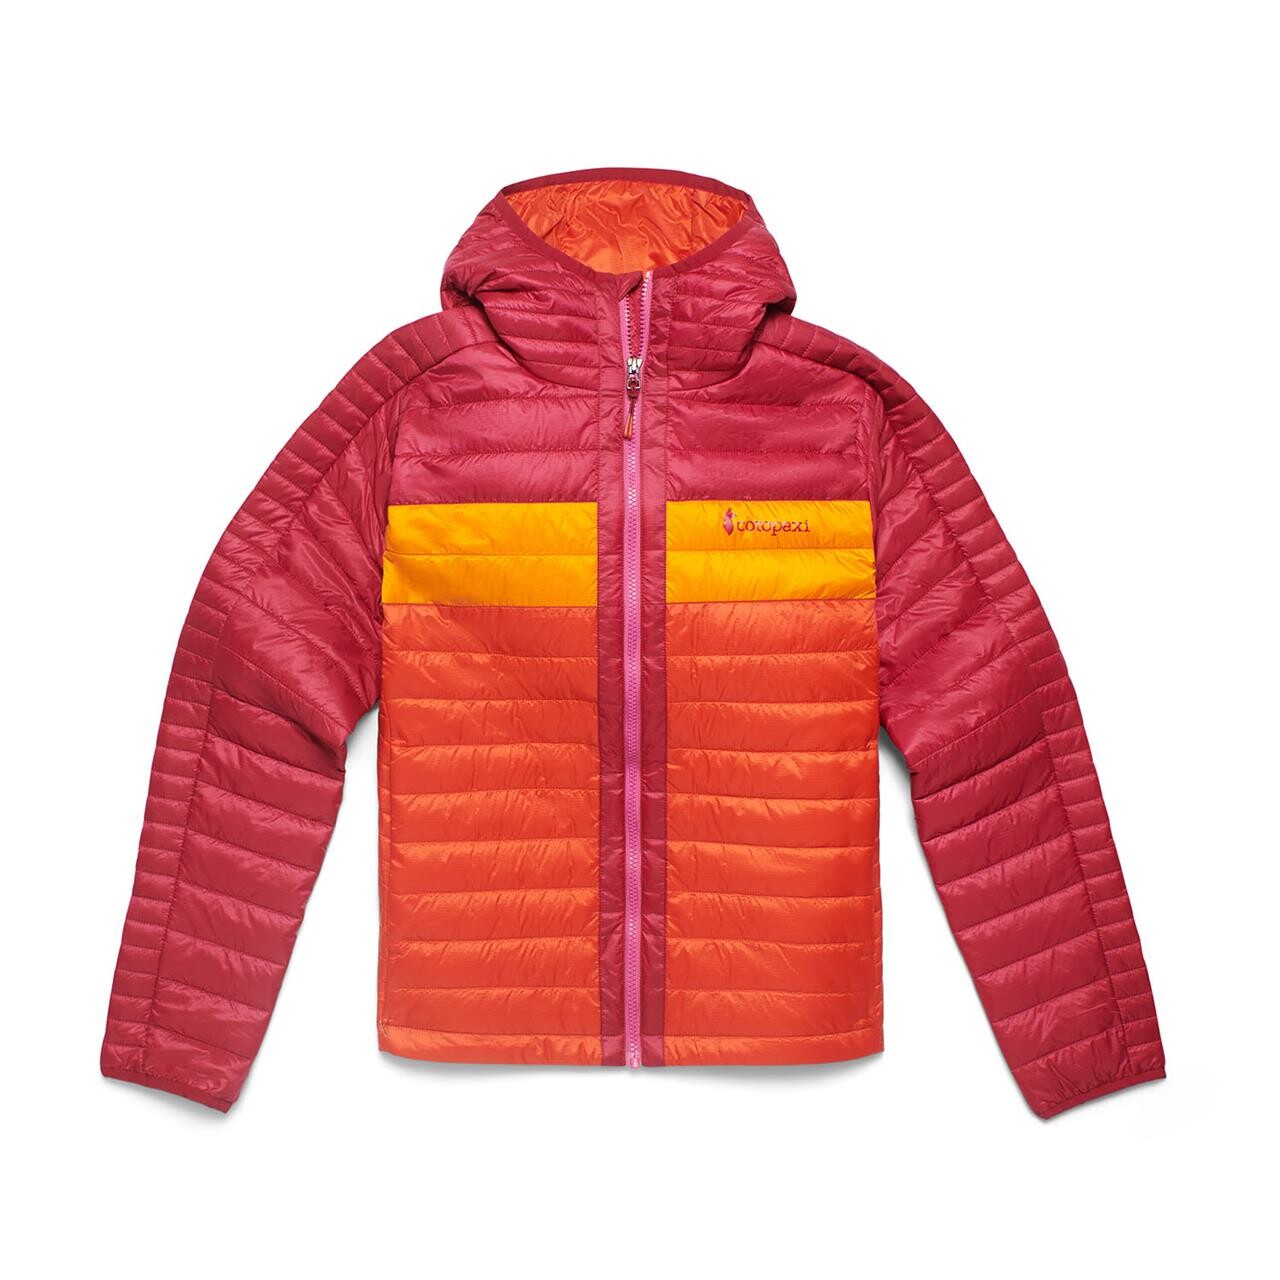 Billede af Cotopaxi Womens Capa Insulated Hooded Jacket (Rød (RASPBERRY & CANYON) Large)